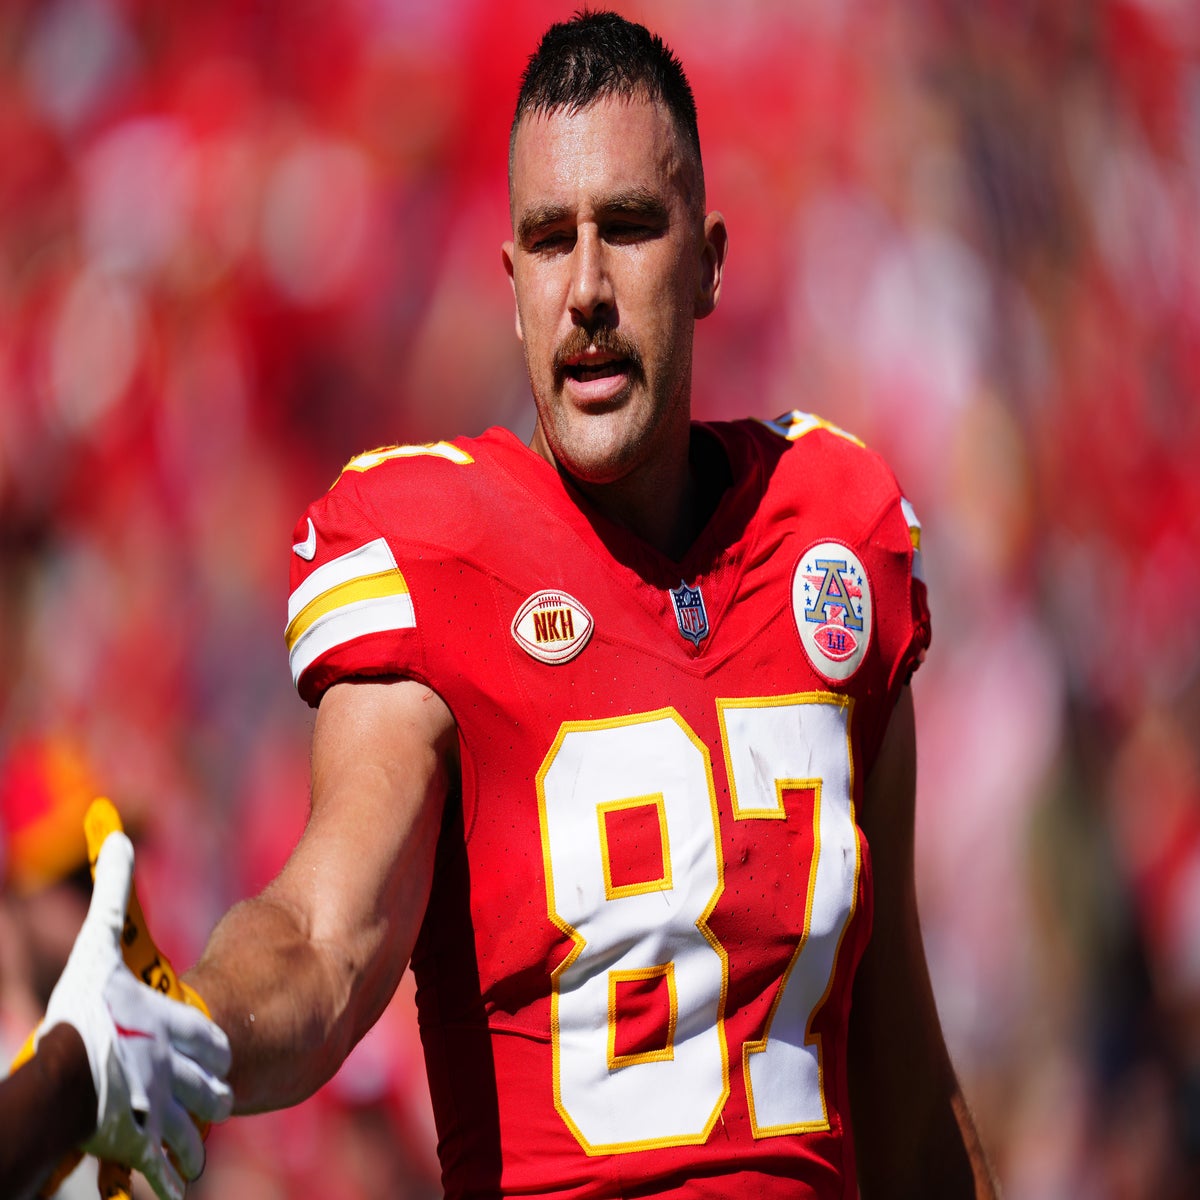 Travis Kelce is a superhero. Thank you for akways supporting